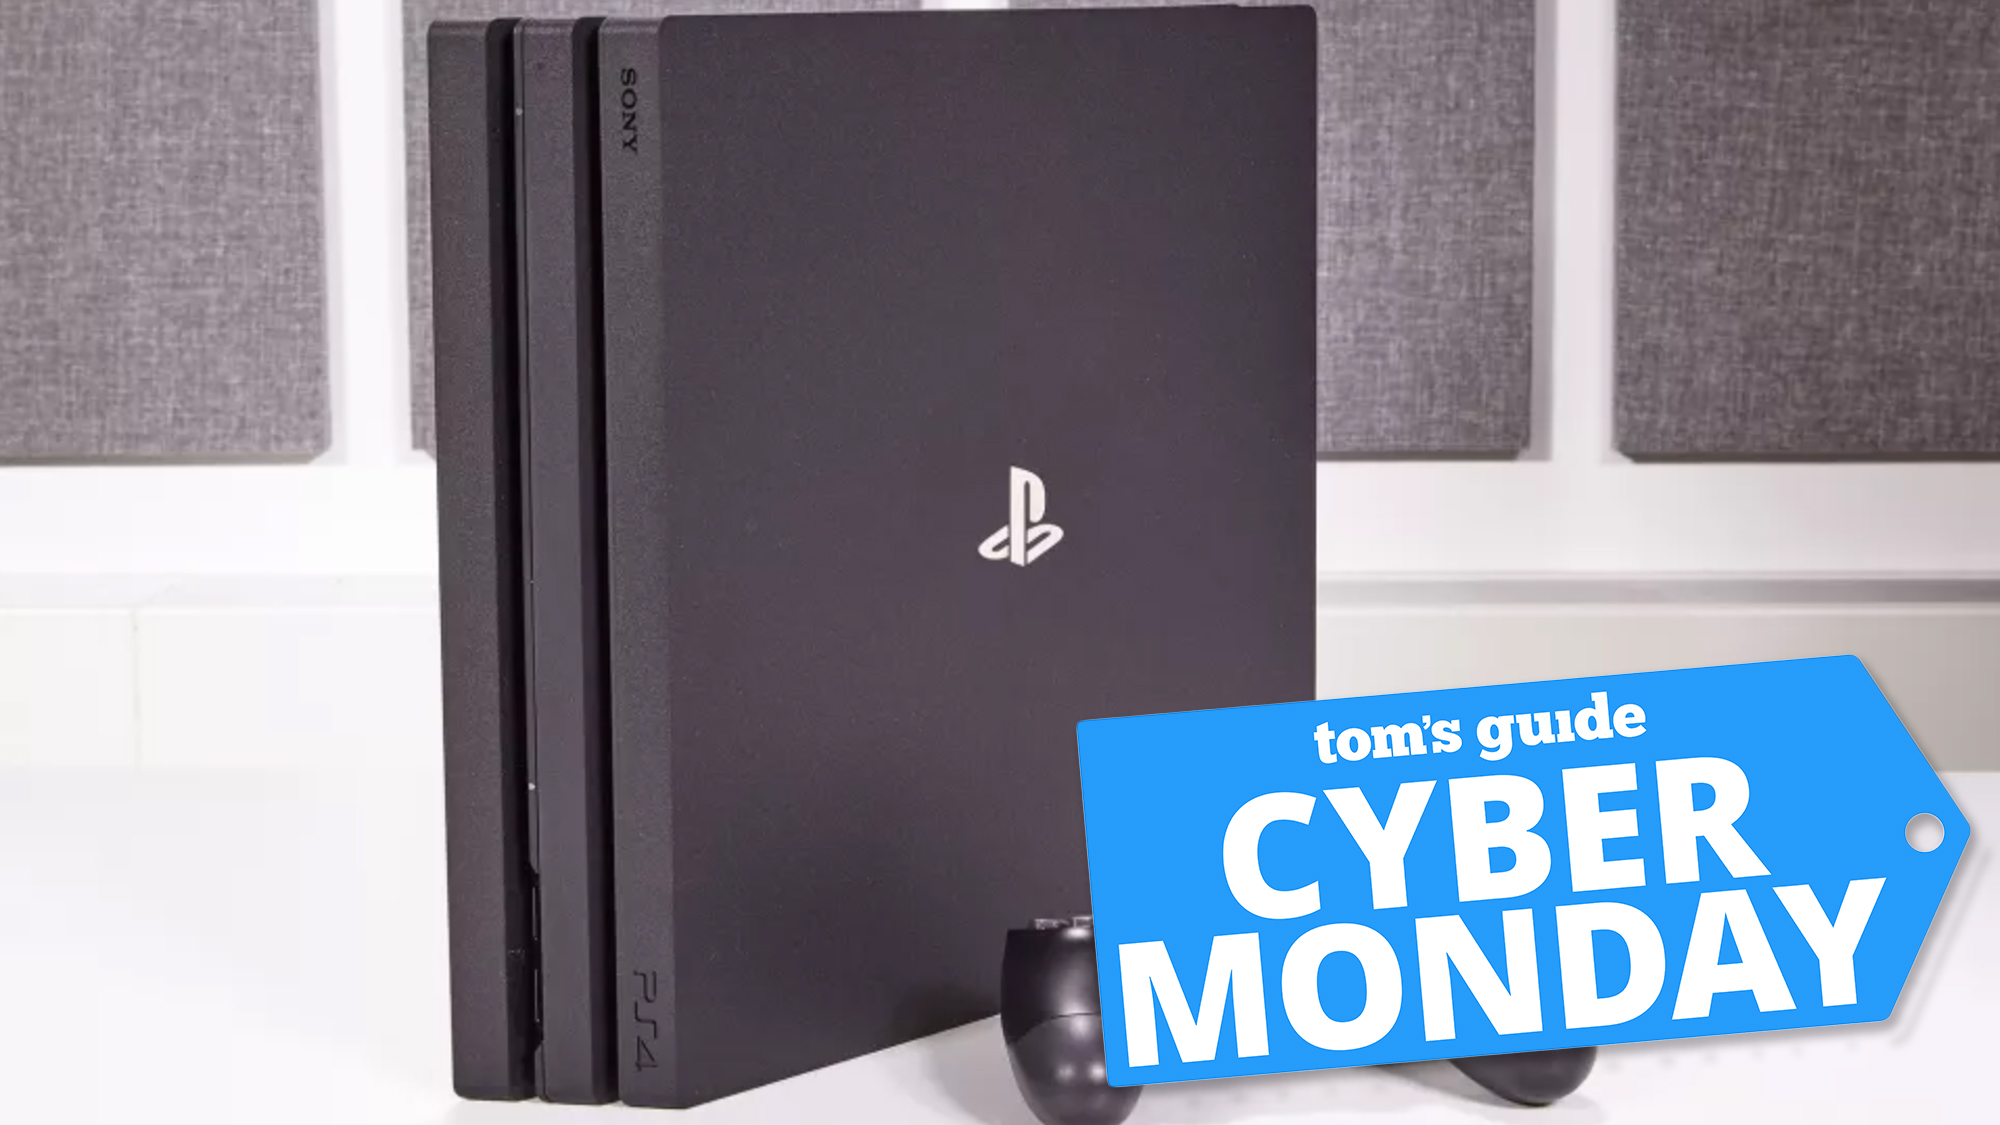 ps4 sale cyber monday